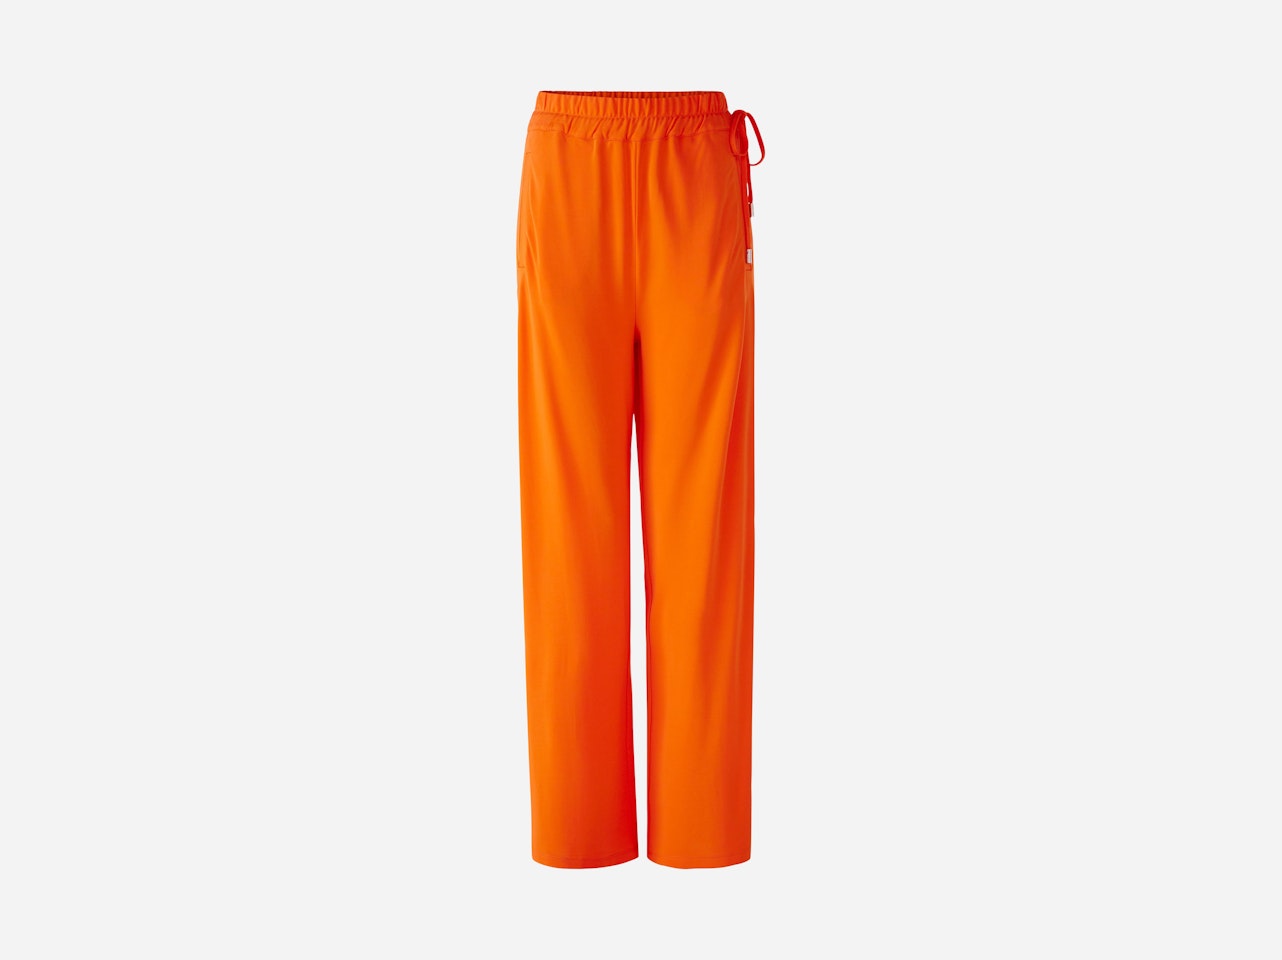 Jersey trousers  jogger style